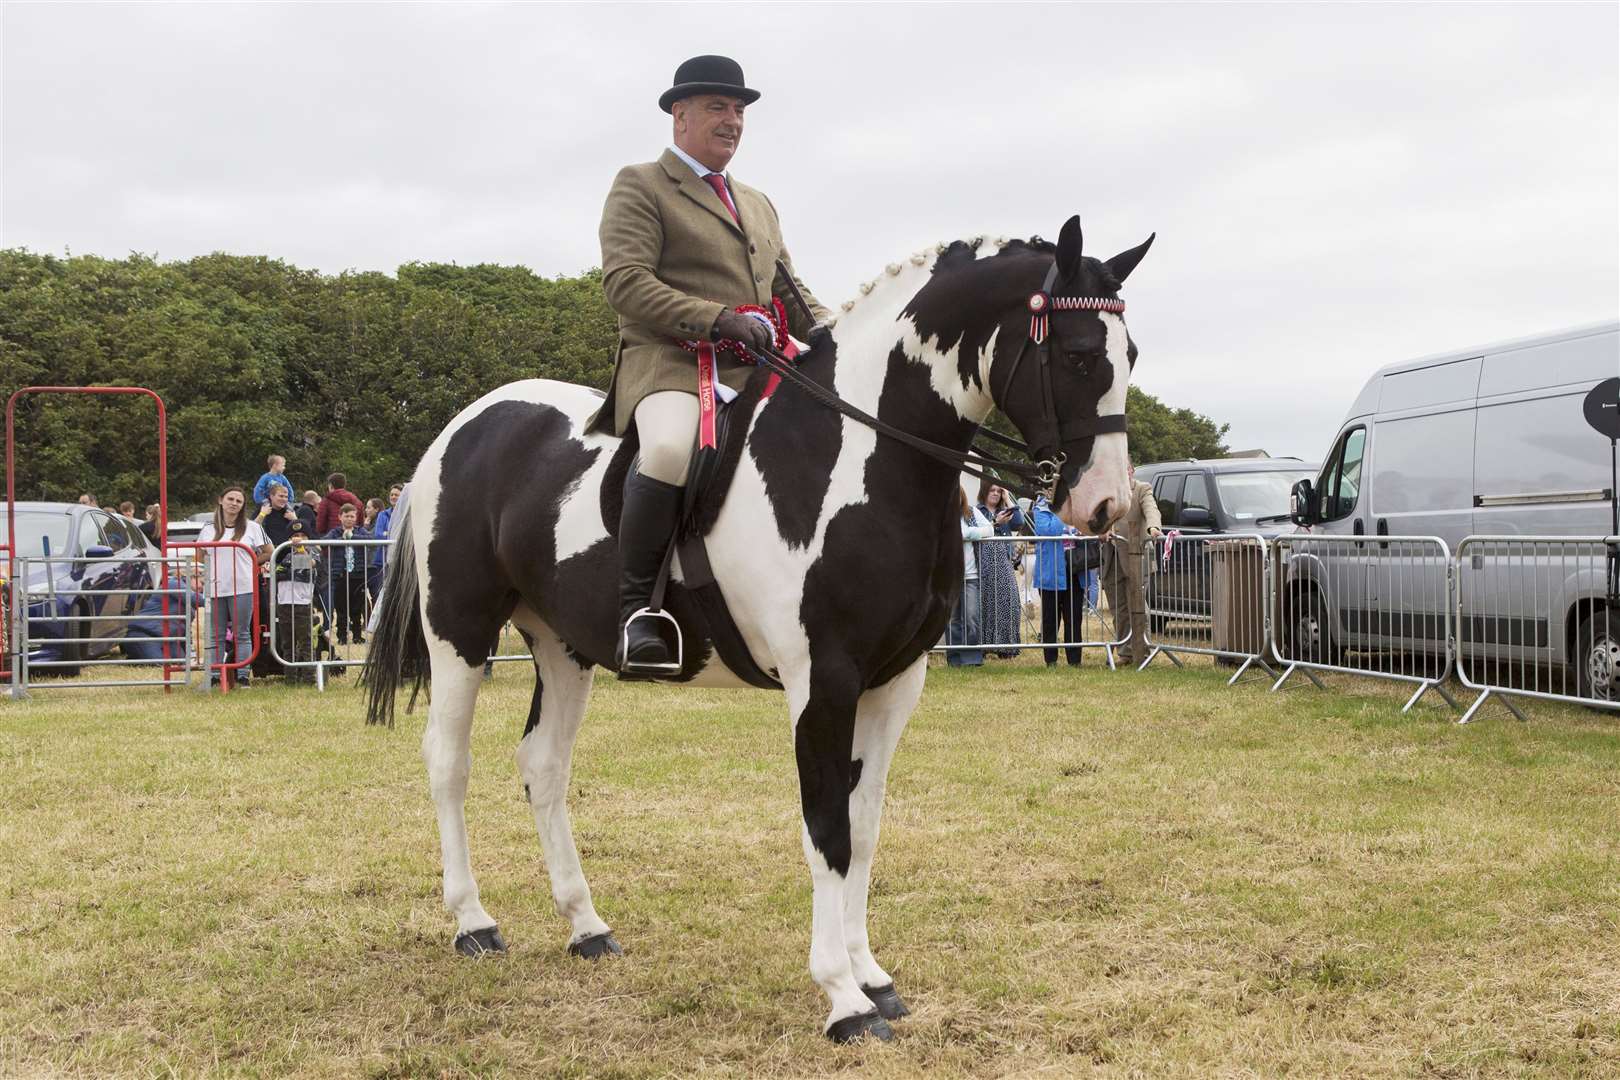 Geraldine Harrold, Wick, took the supreme horse championship and the champion of champions award with Independent Boy, her four-year-old light horse ridden by James Munro. Picture: Robert MacDonald / Northern Studios